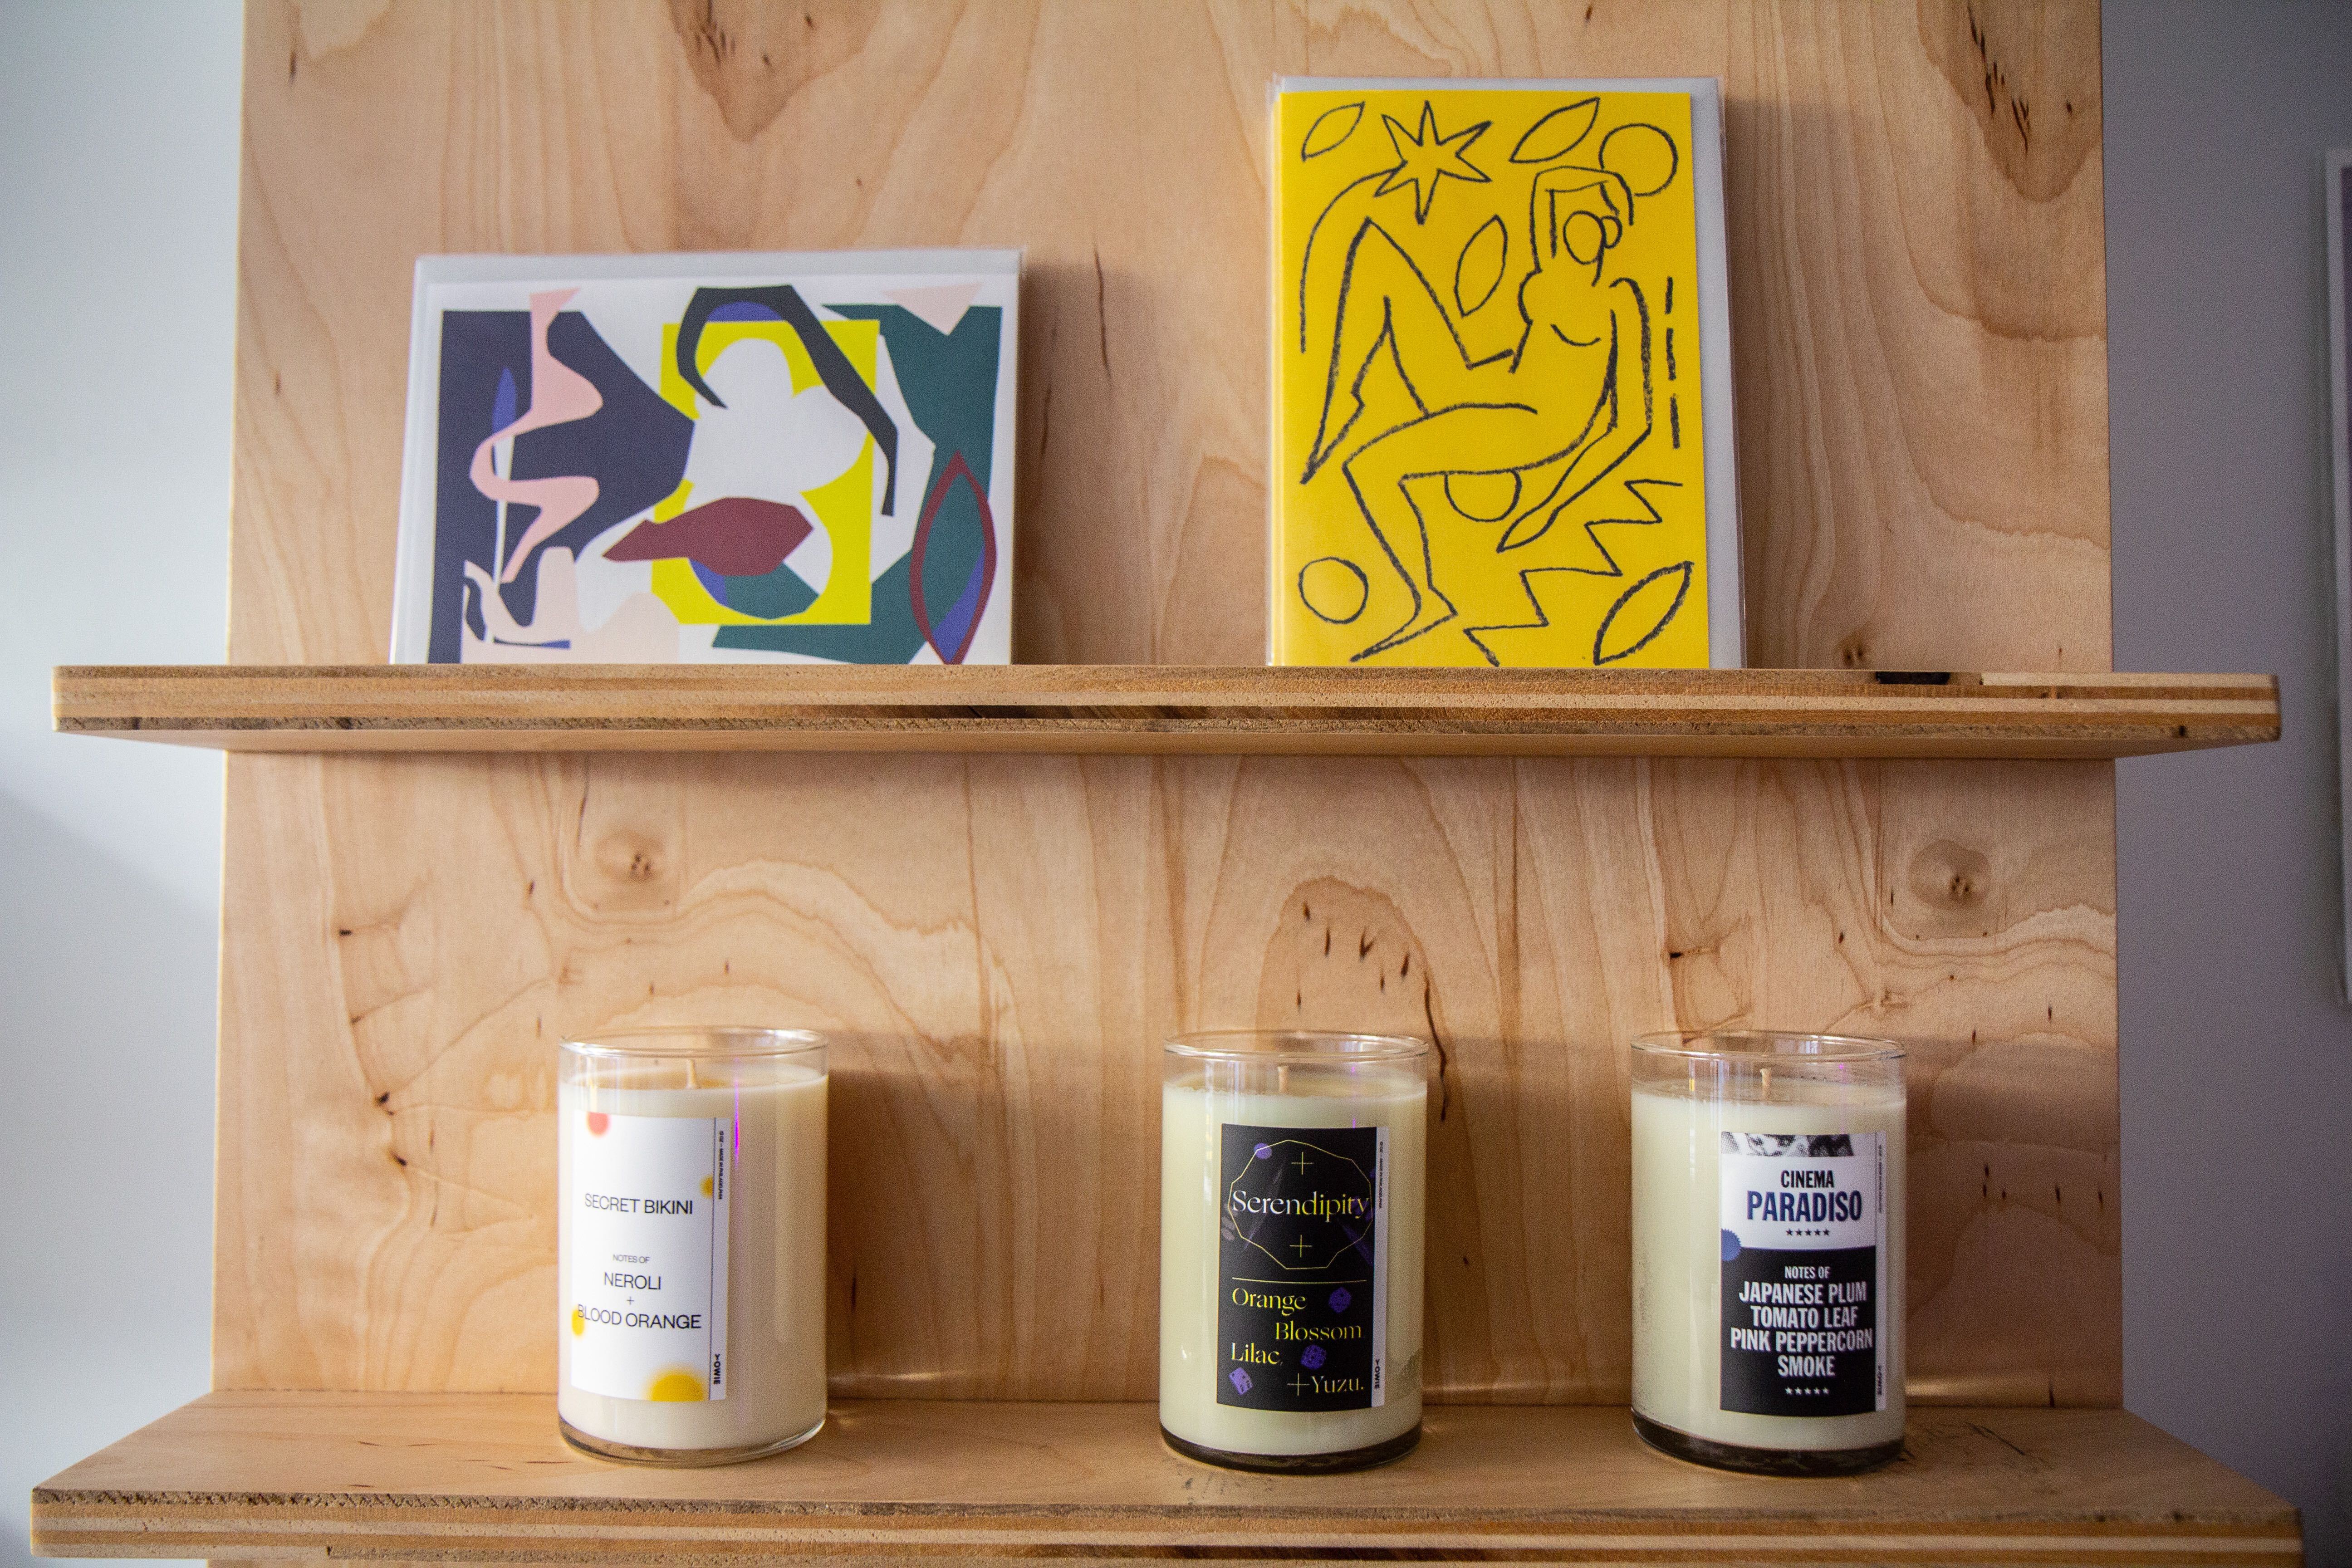 Stationery and candles for sale at YOWIE in South Philadelphia.